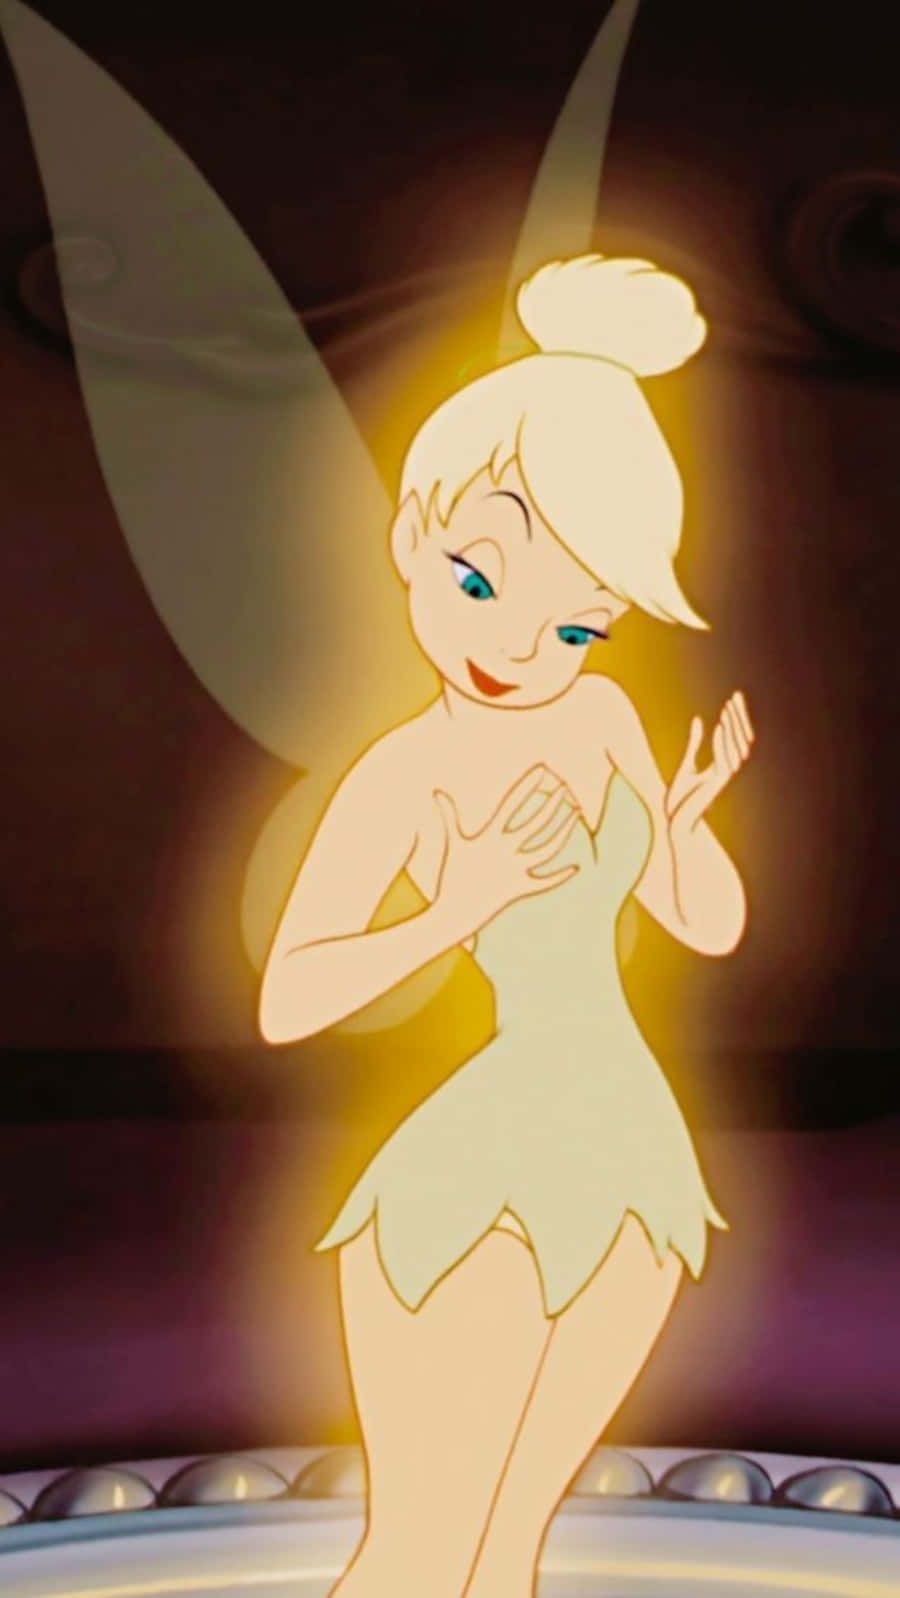 "Spreading Pixie Dust: Tinkerbell Brings a Little Magic Everywhere She Goes"